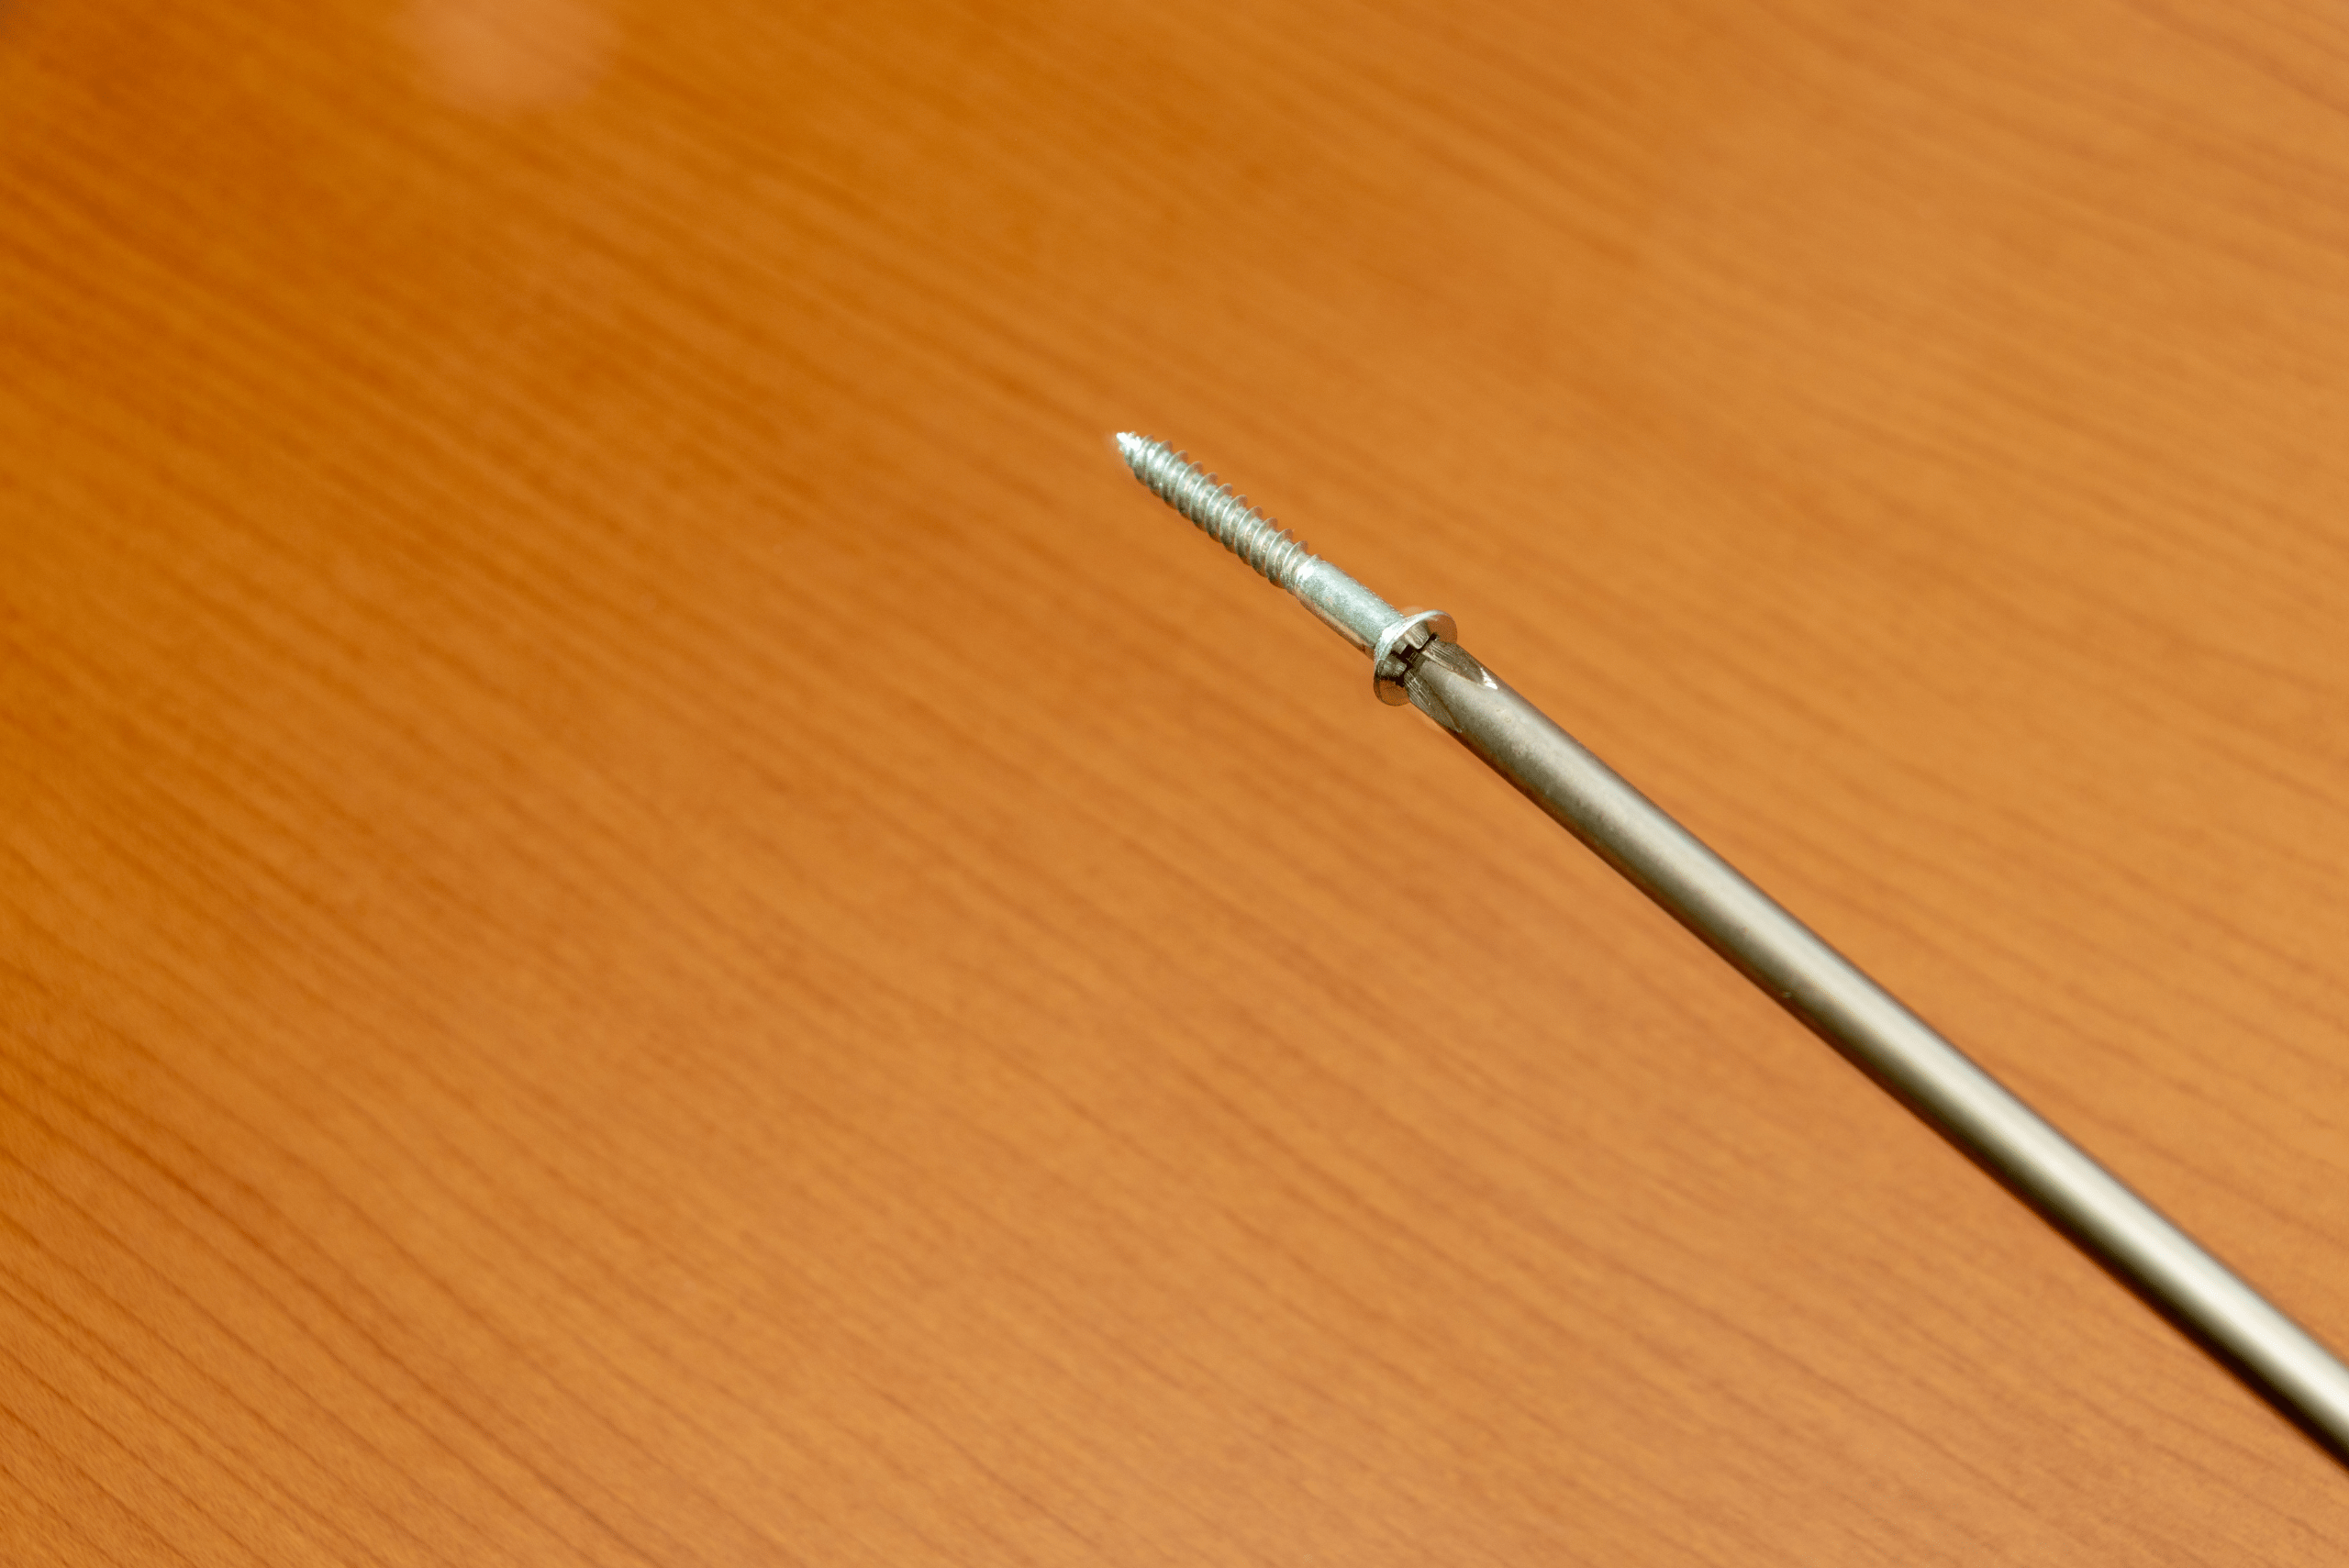 a magnetic screwdriver holding up a screw.